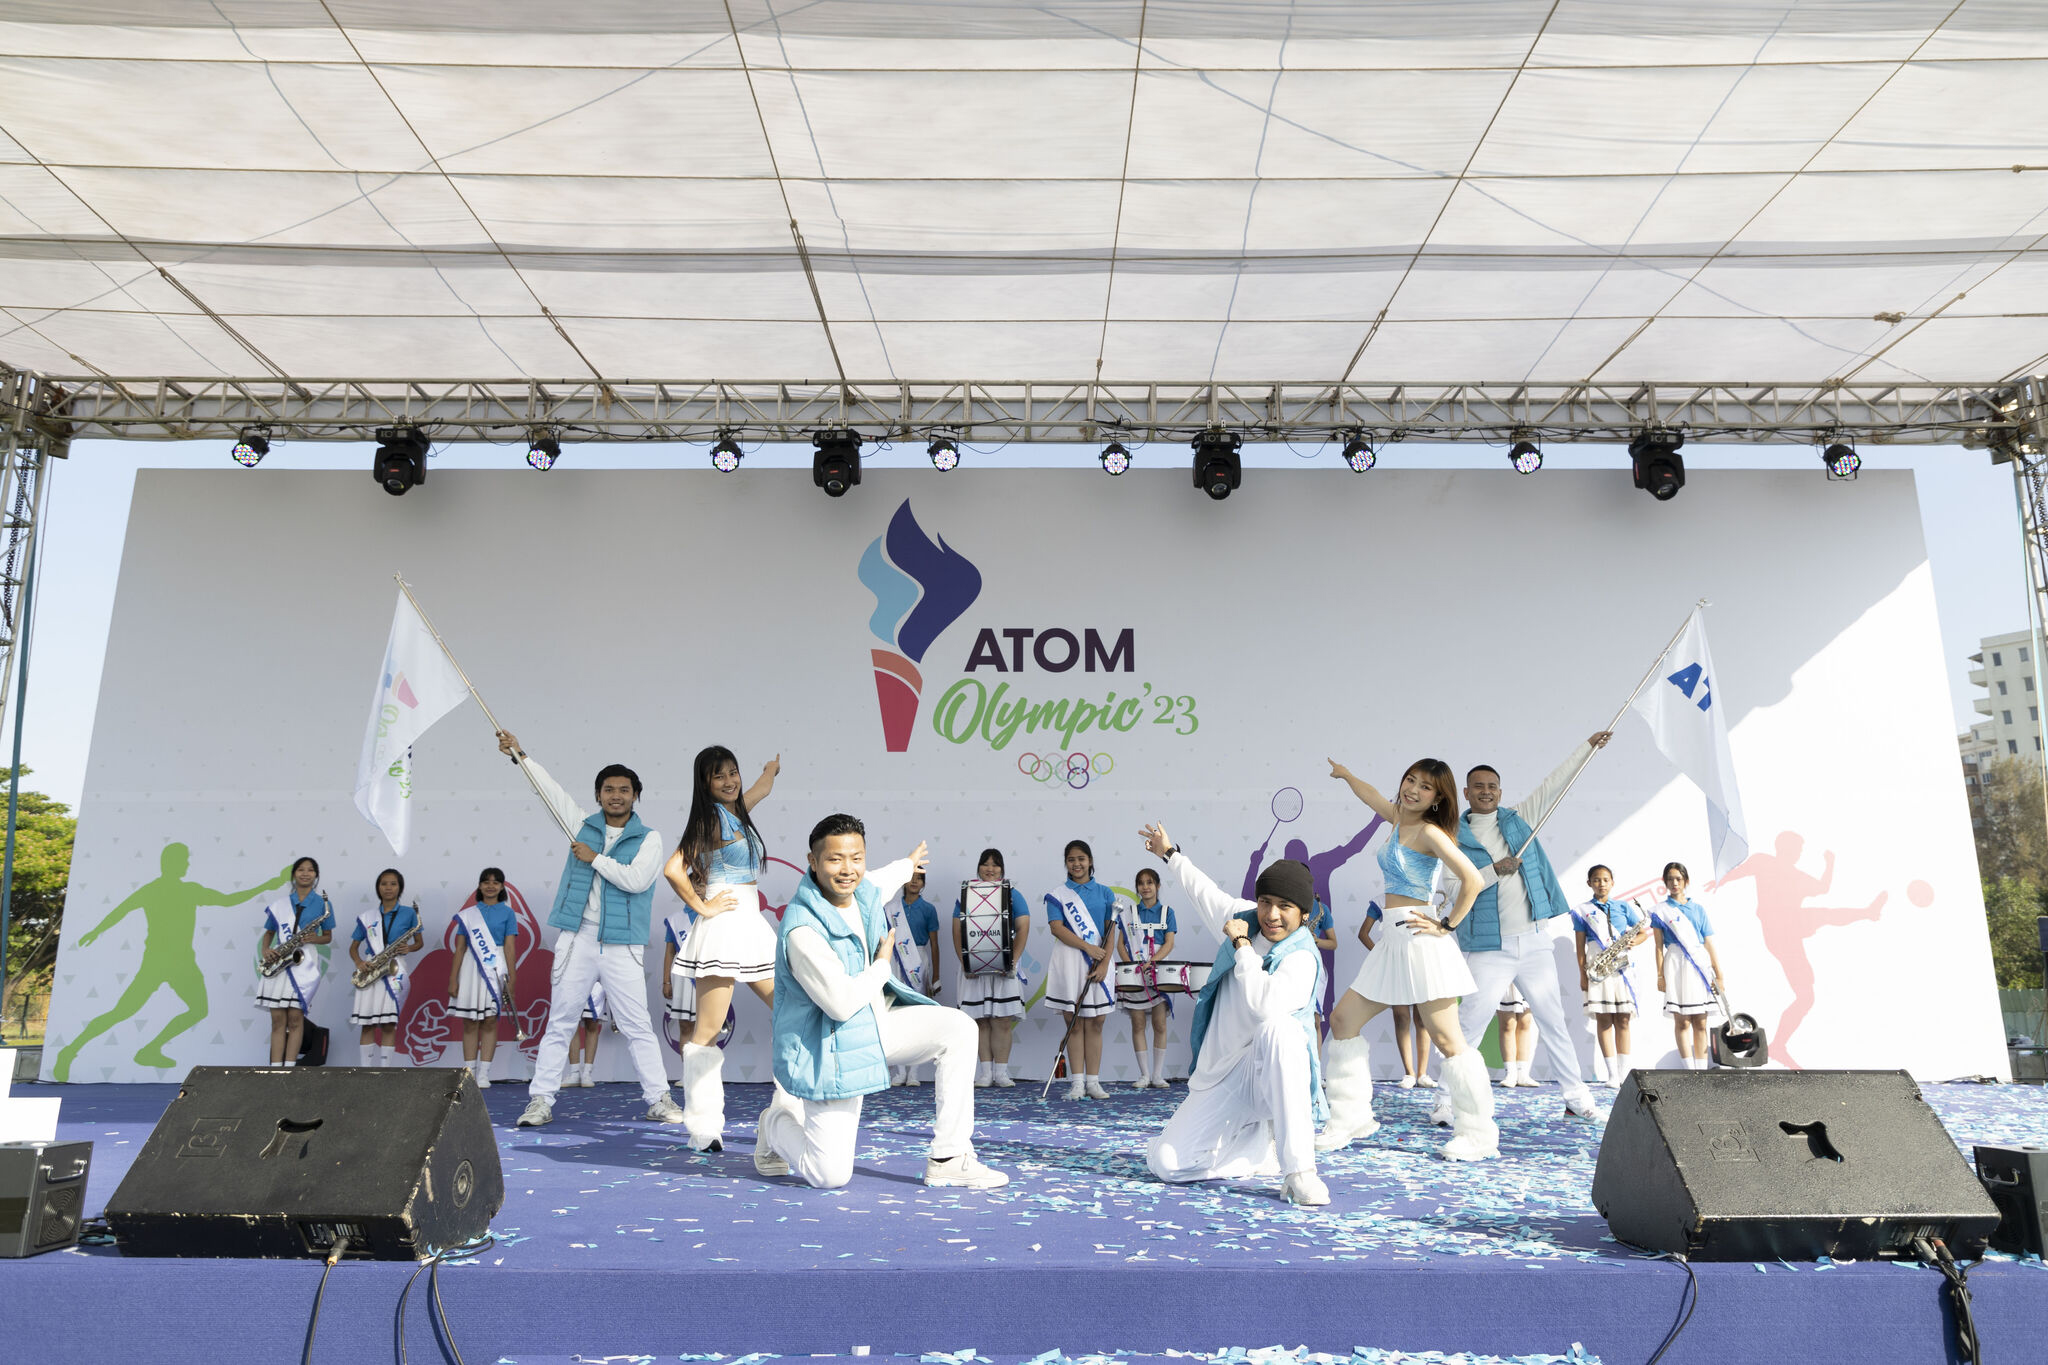 a group of people performing on a stage